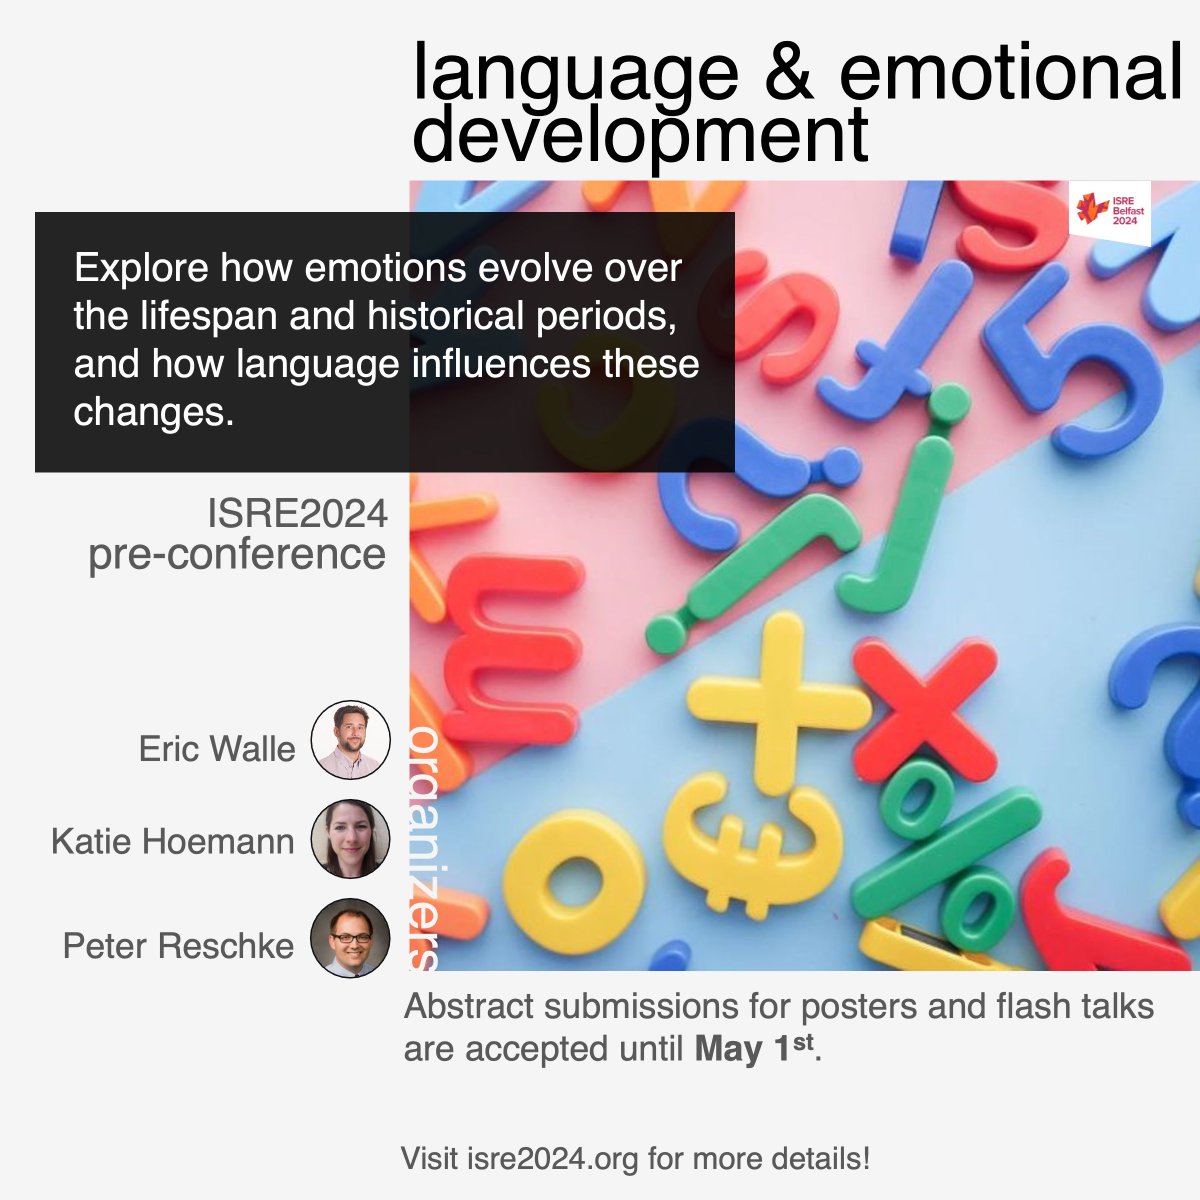 Ever wondered how language influences emotional development over the lifespan & throughout history? Join Eric Walle, @katiehoemann, Peter Reschke & others to find out and discuss further at this #ISRE2024 pre-conference!